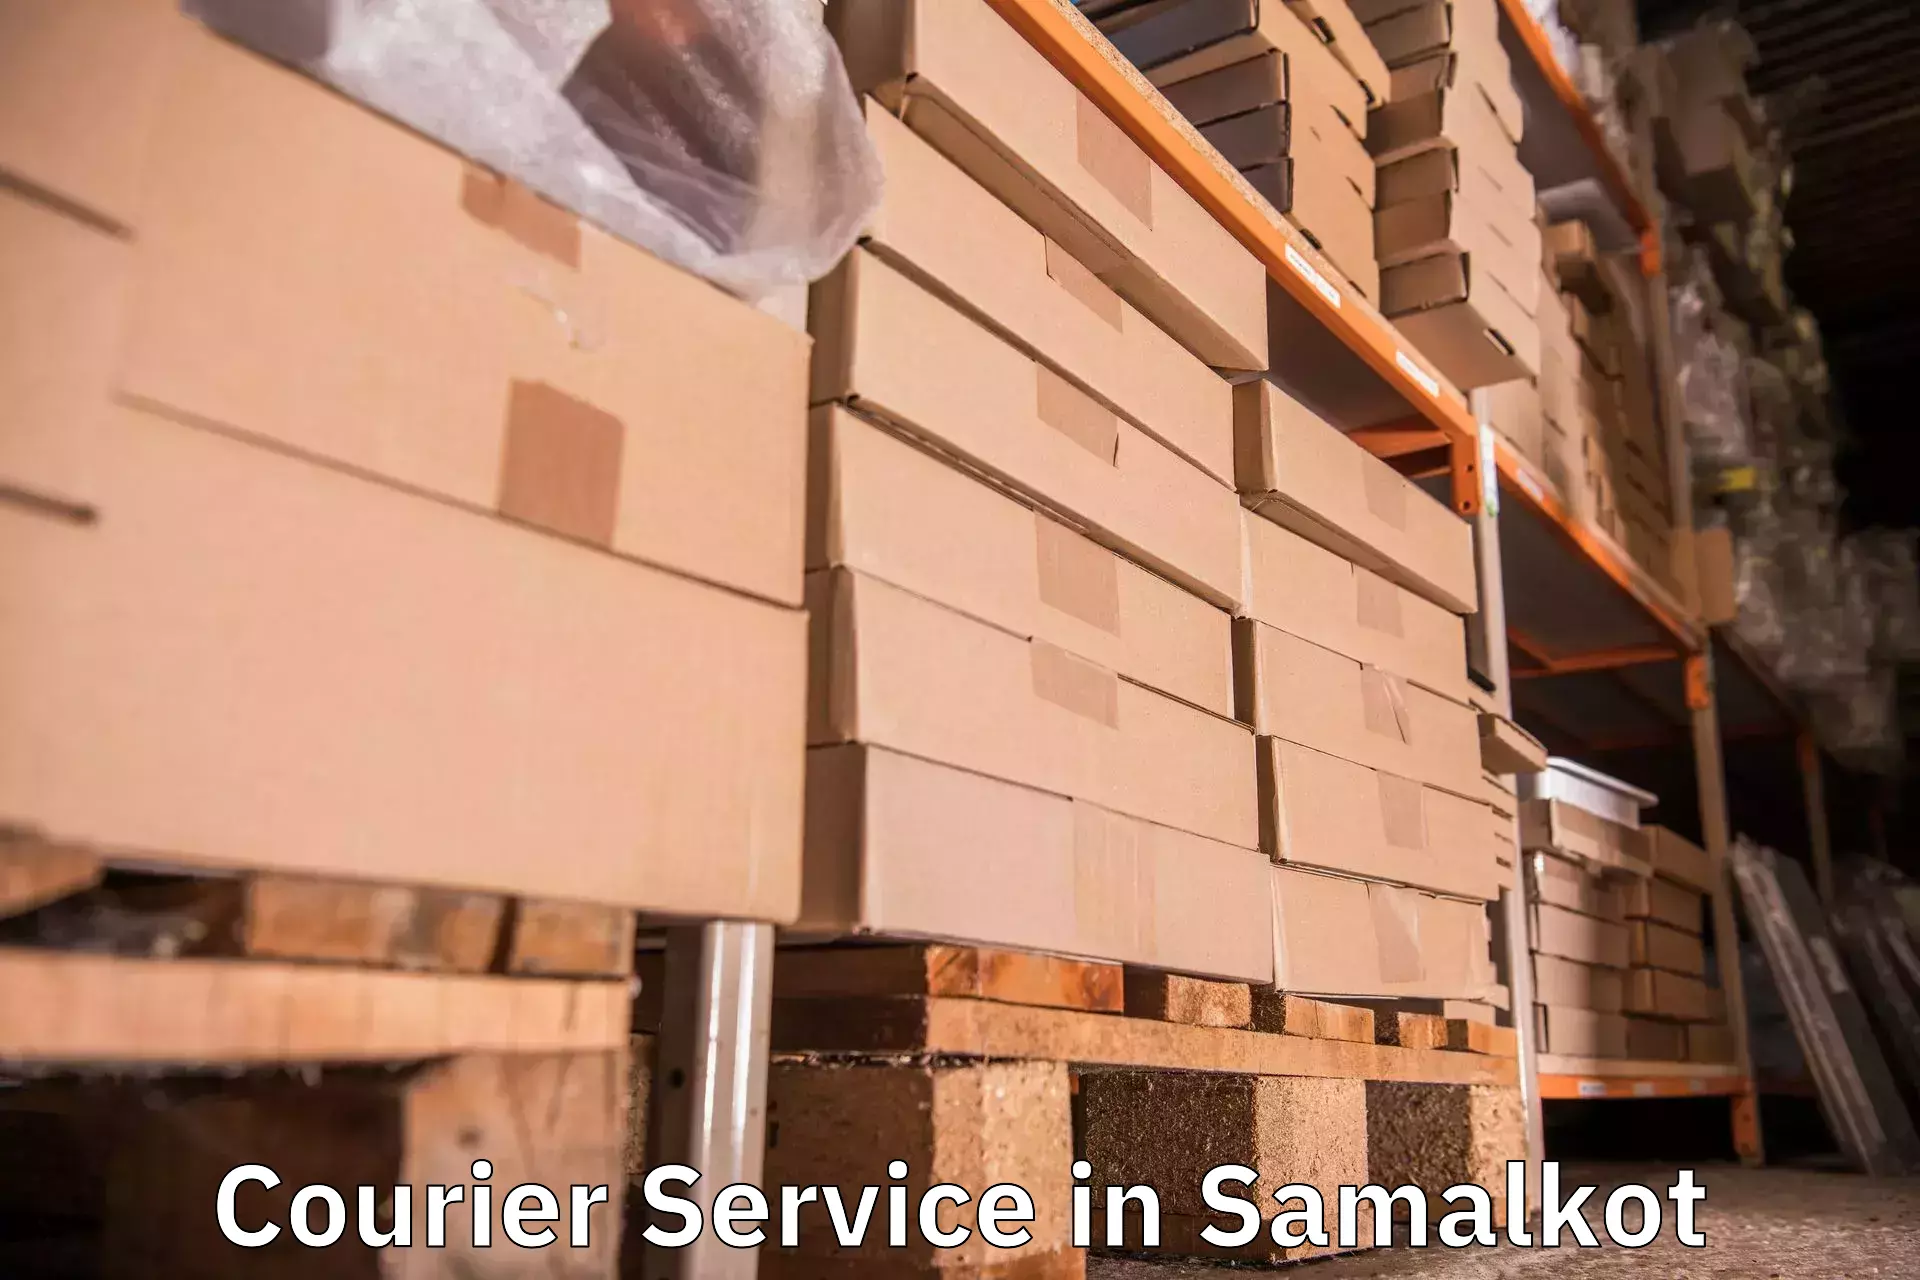 Personal parcel delivery in Samalkot